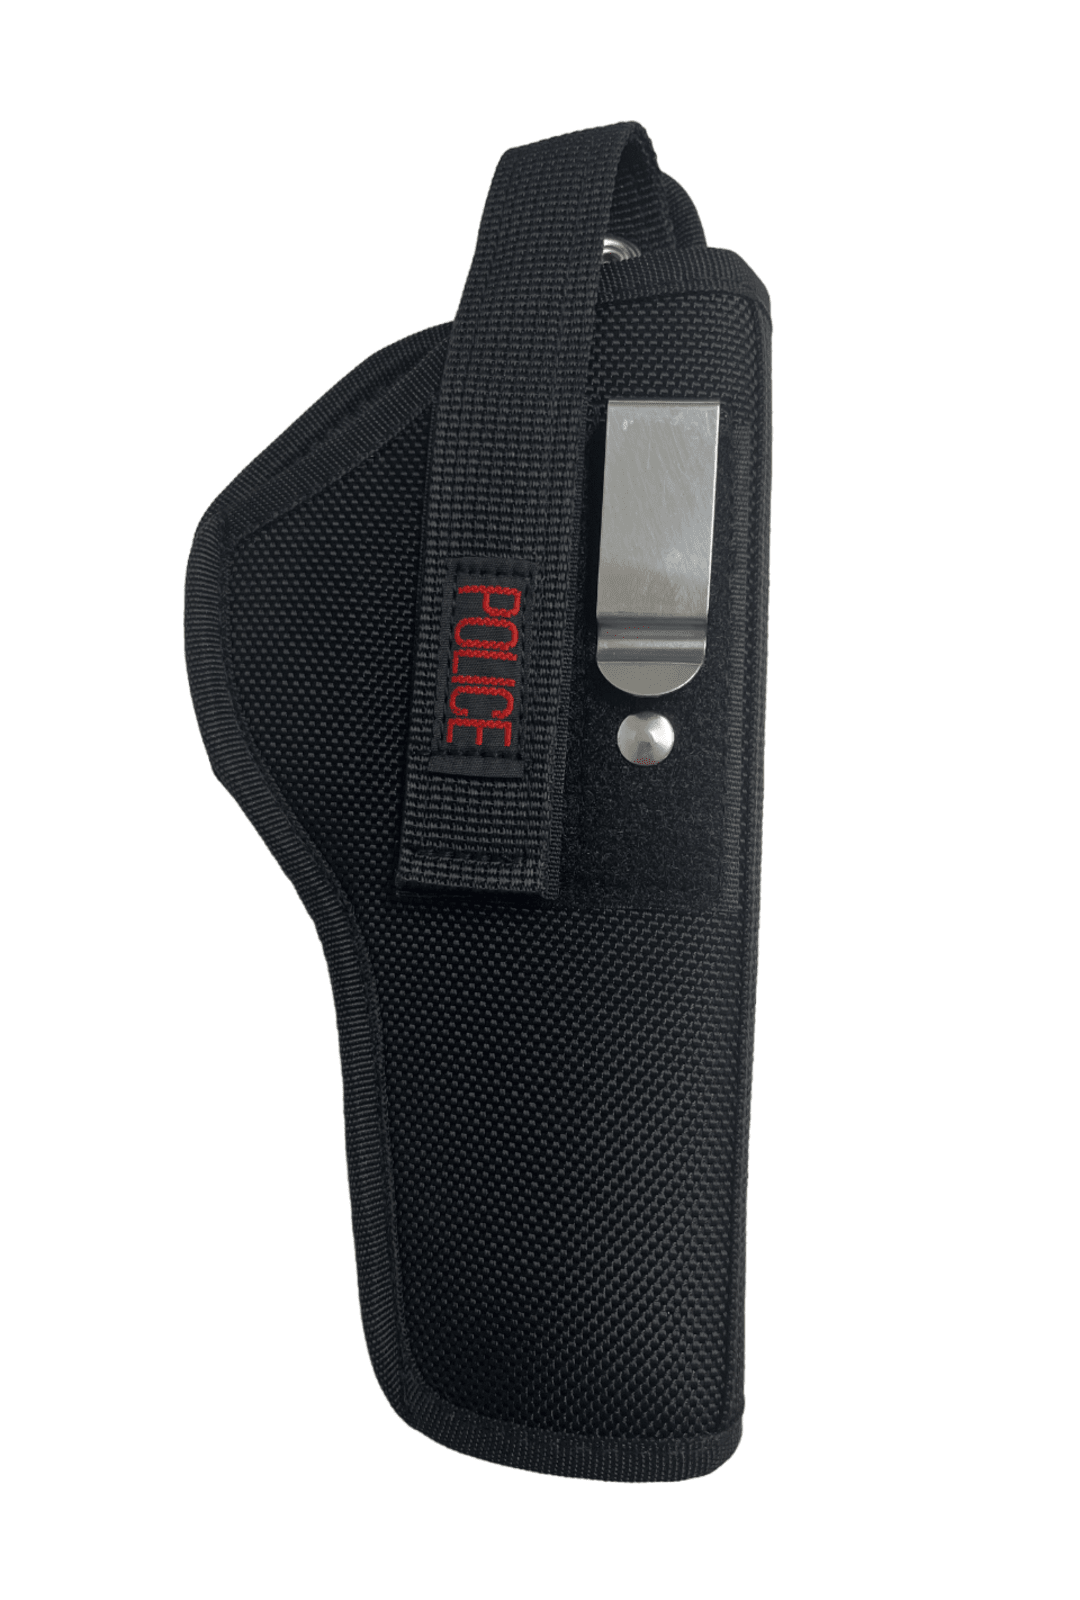 Police Gun Holster with clip